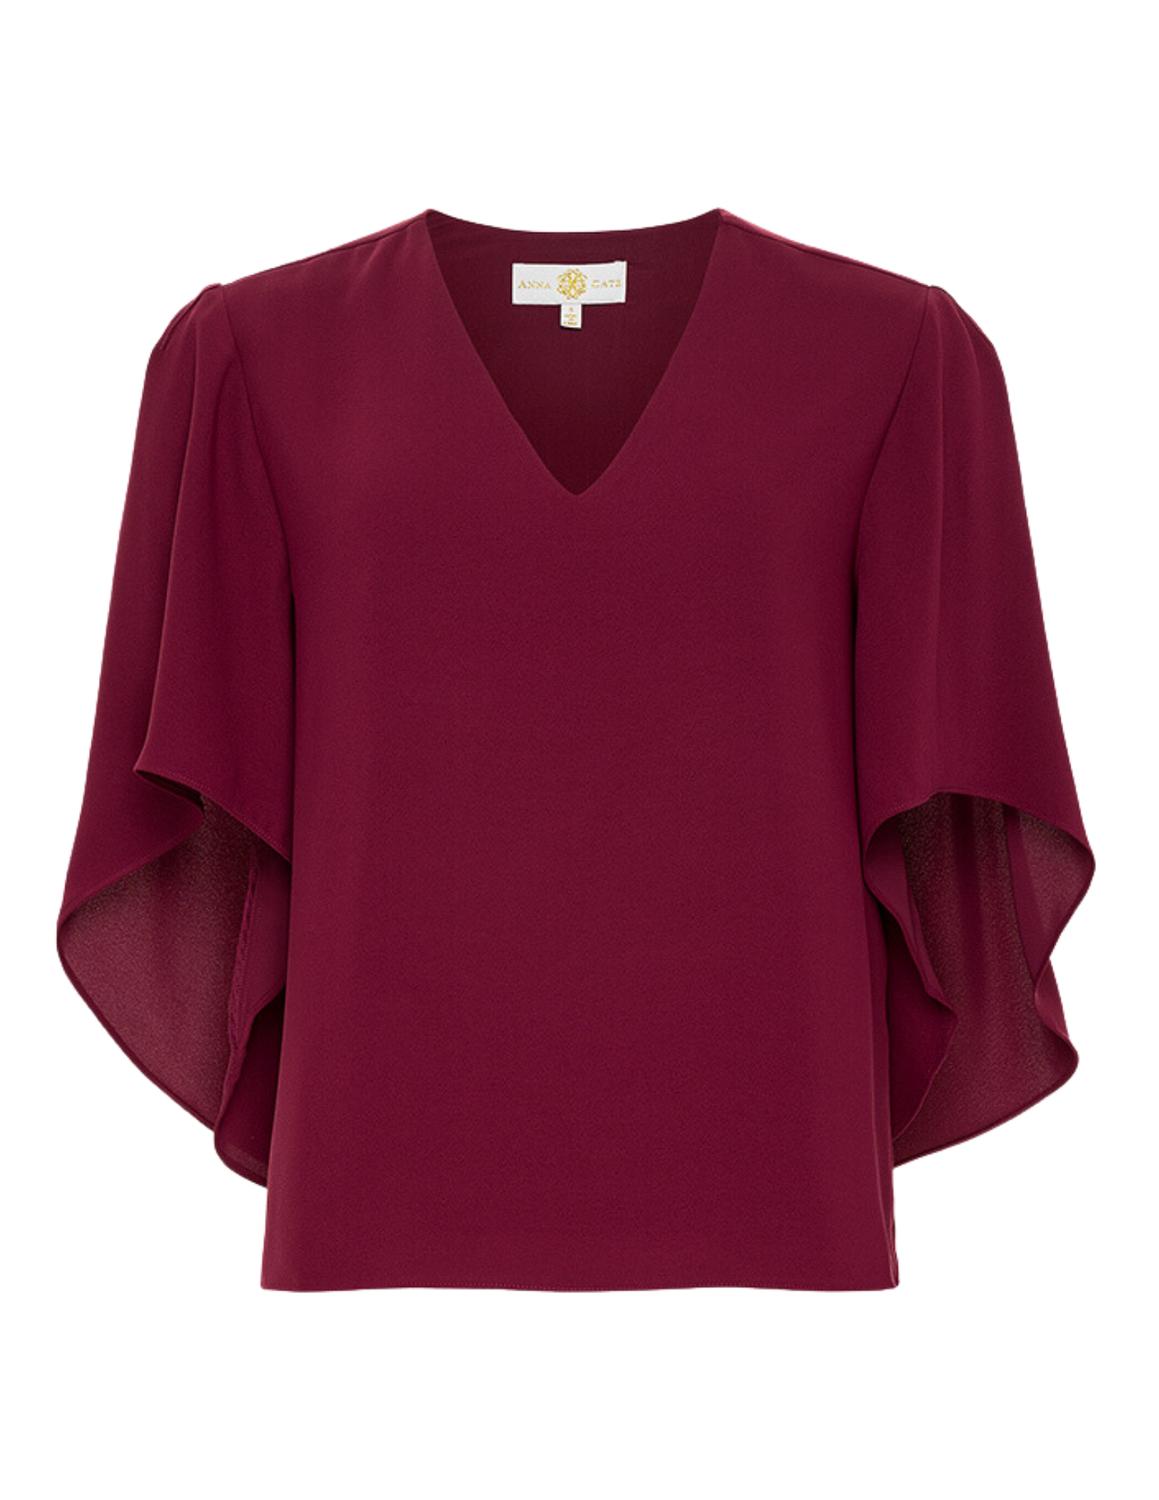 Anna Cate Women's Nina Top In Beet Red